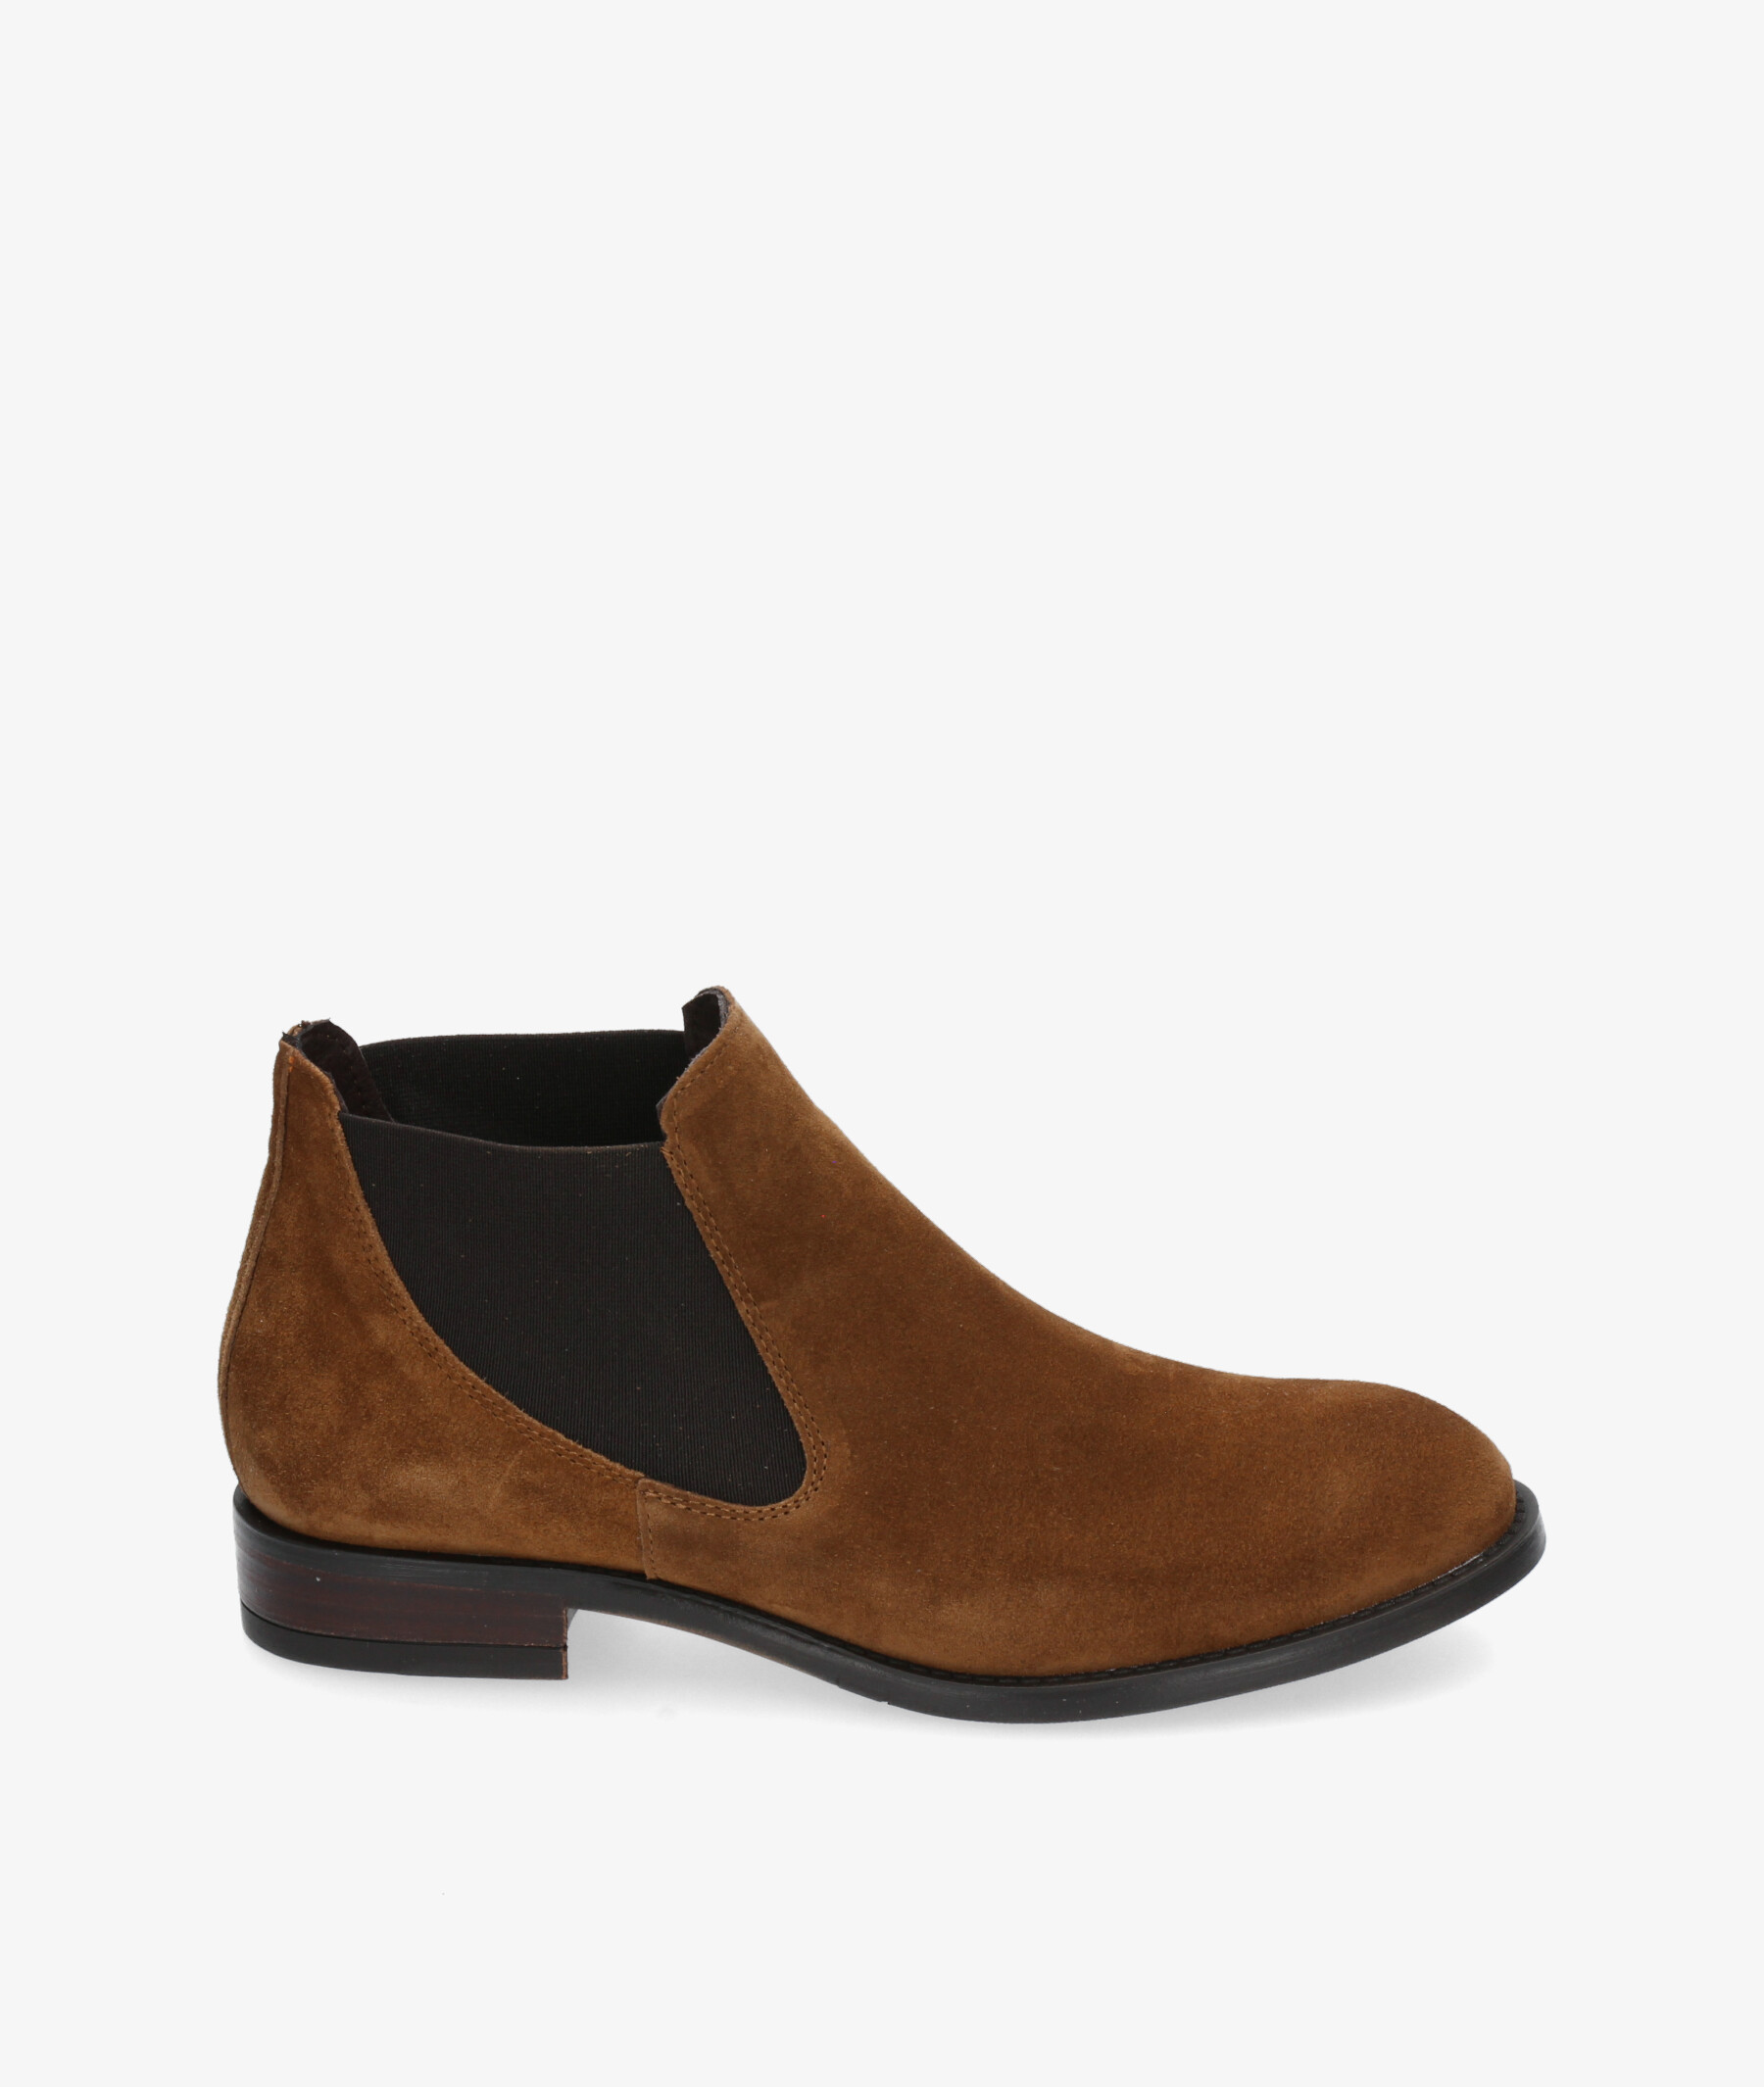 Alpe Suede Leather Ankle Boots 2646 cuero image 0